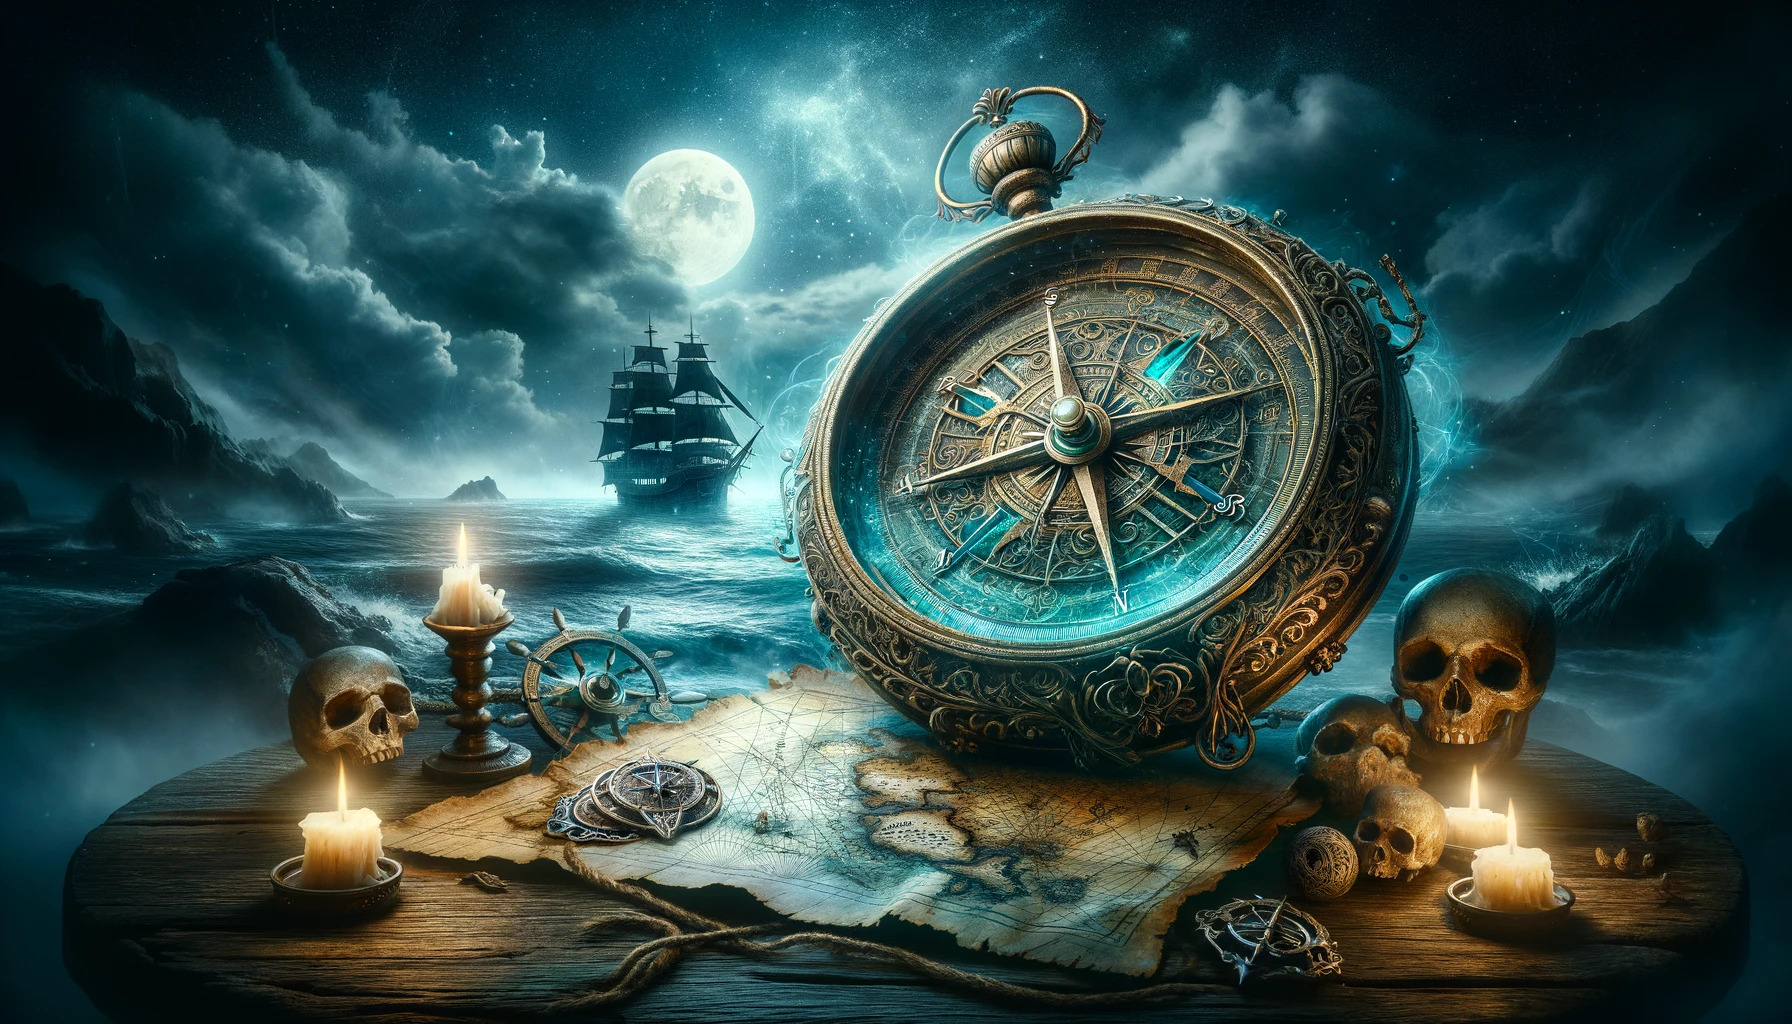 a cinematic image capturing the essence of a ship name generator, set in a mystical scene at sea under a moonlit sky. This artwork embodies the magic and mystery of nautical adventures, featuring an ancient compass and a map surrounded by the enigmatic allure of the ocean.